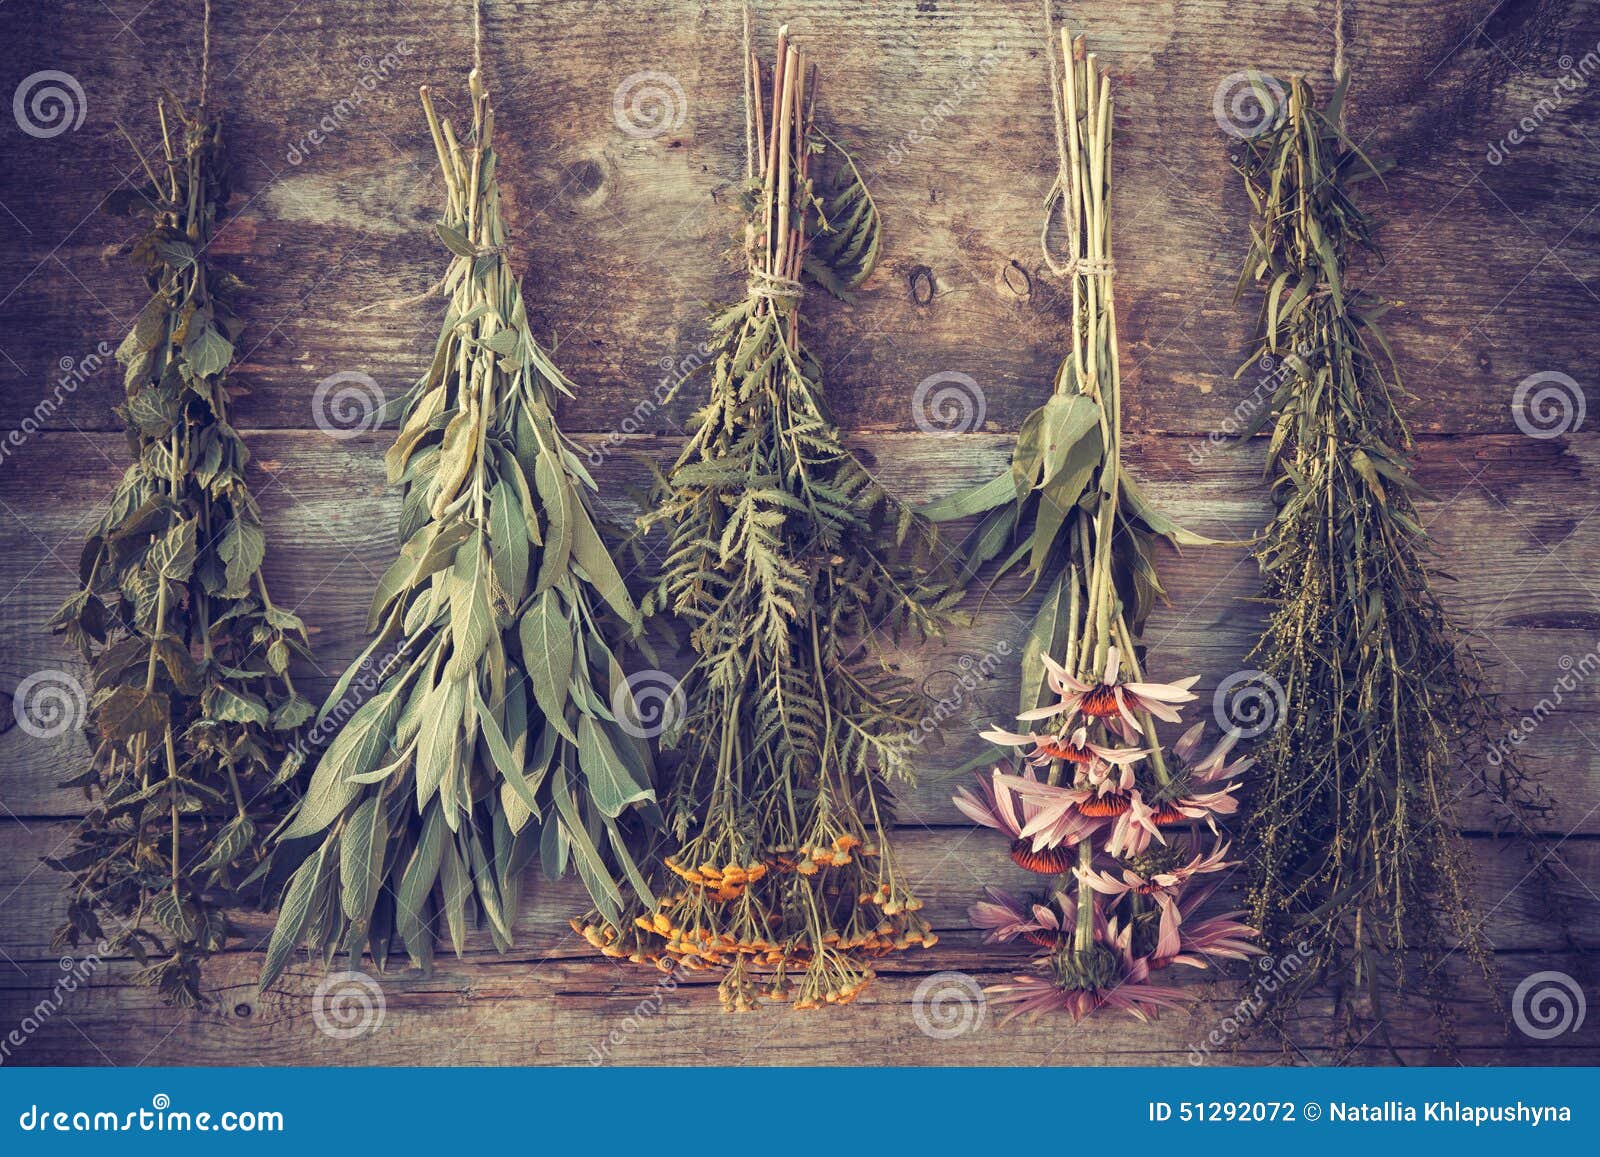 vintage stylized photo of bunches of healing herbs